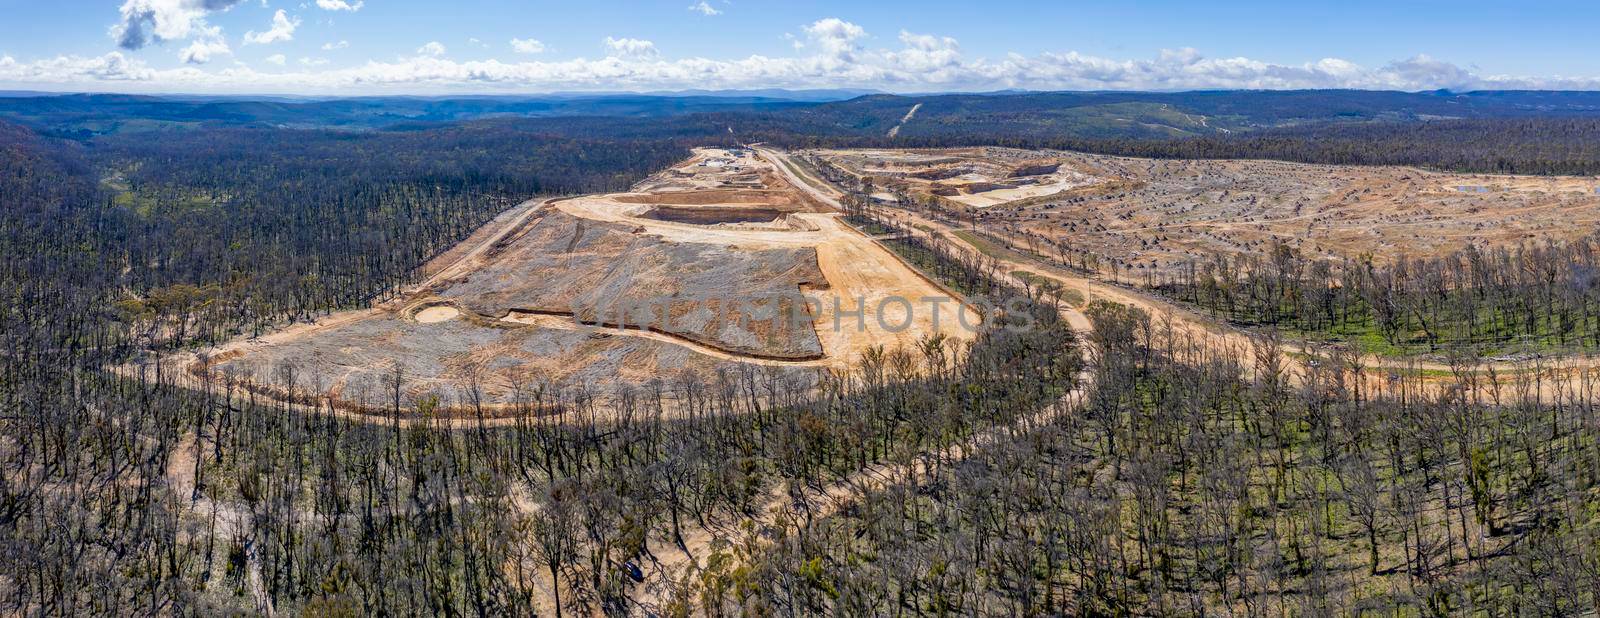 Aerial view of forest regeneration after bushfires and a new Quarry being built in regional Australia